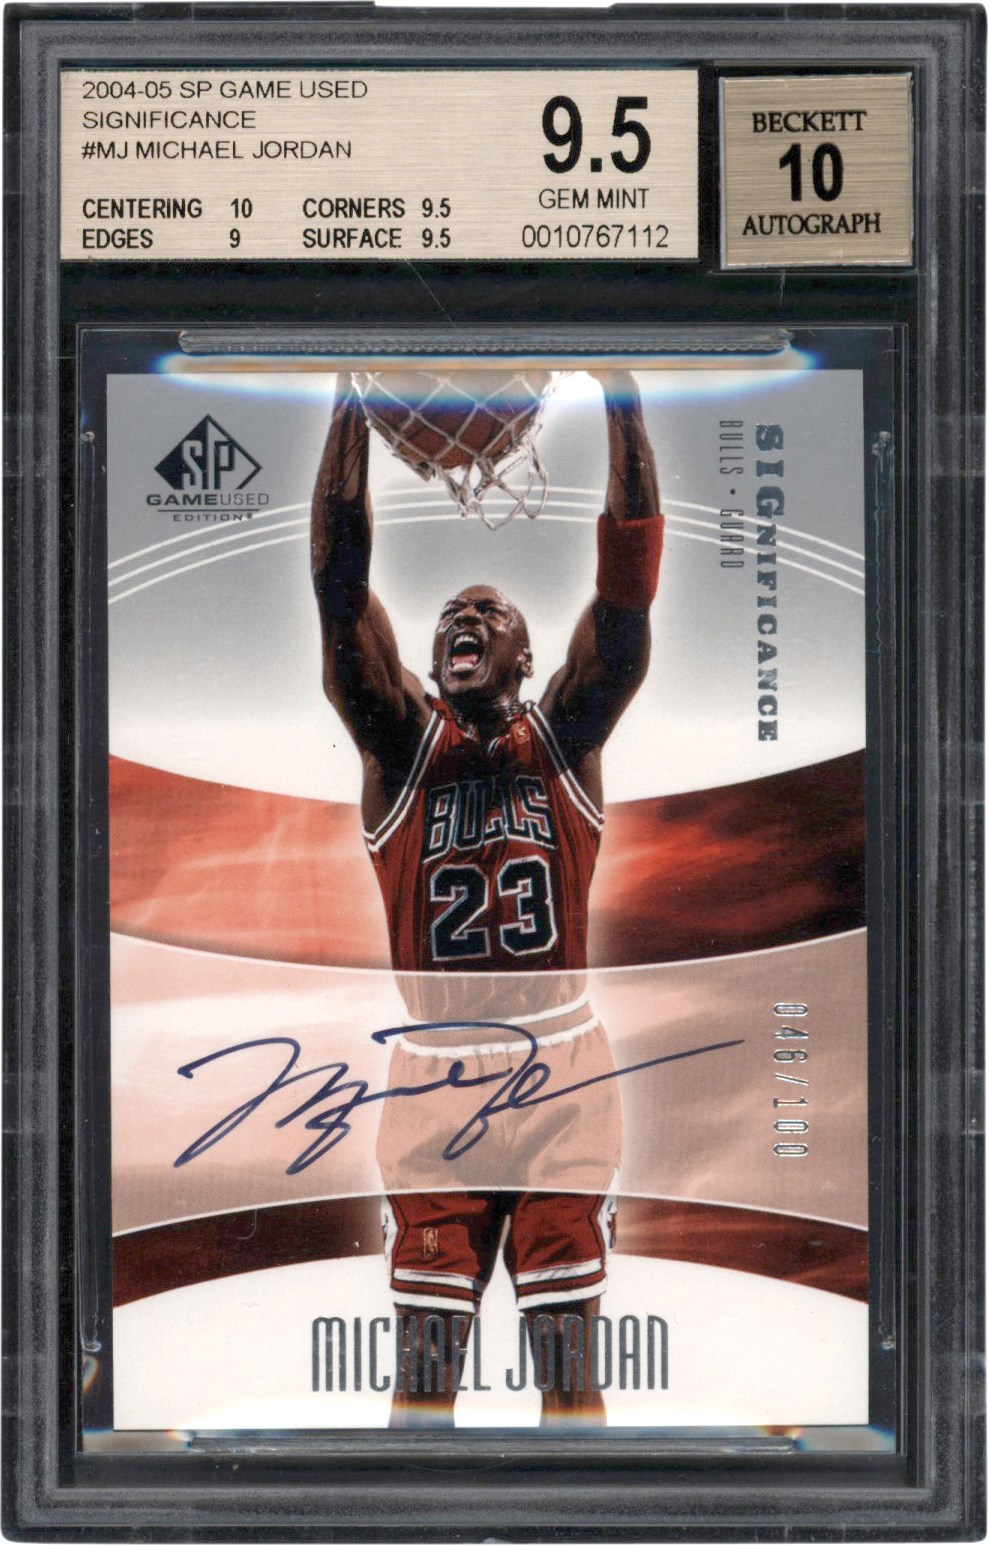 Basketball Cards - 2004-2005 SP Game Used Basketball Significance #MJ Michael Jordan Autograph #46/100 BGS GEM MINT 9.5 Auto 10